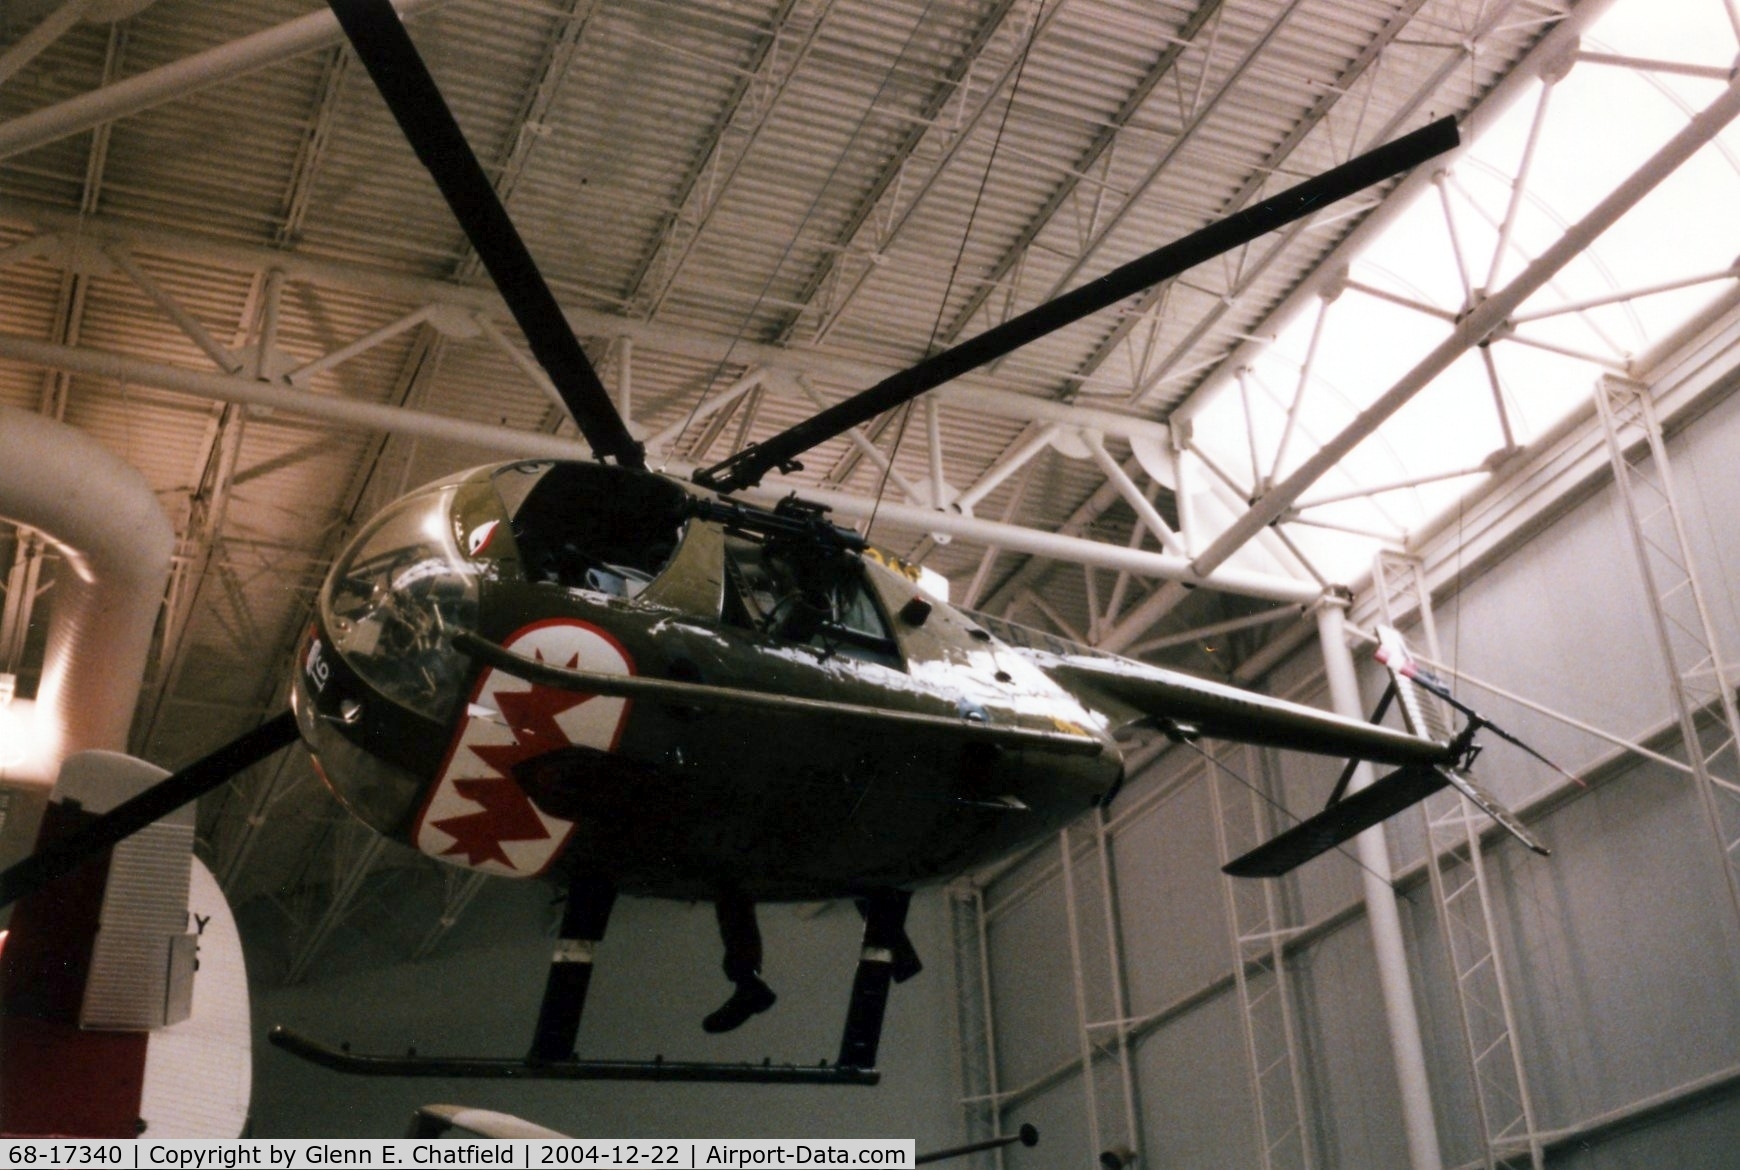 68-17340, 1968 Hughes OH-6A Cayuse C/N 1300, OH-6A at the Army Aviation Museum